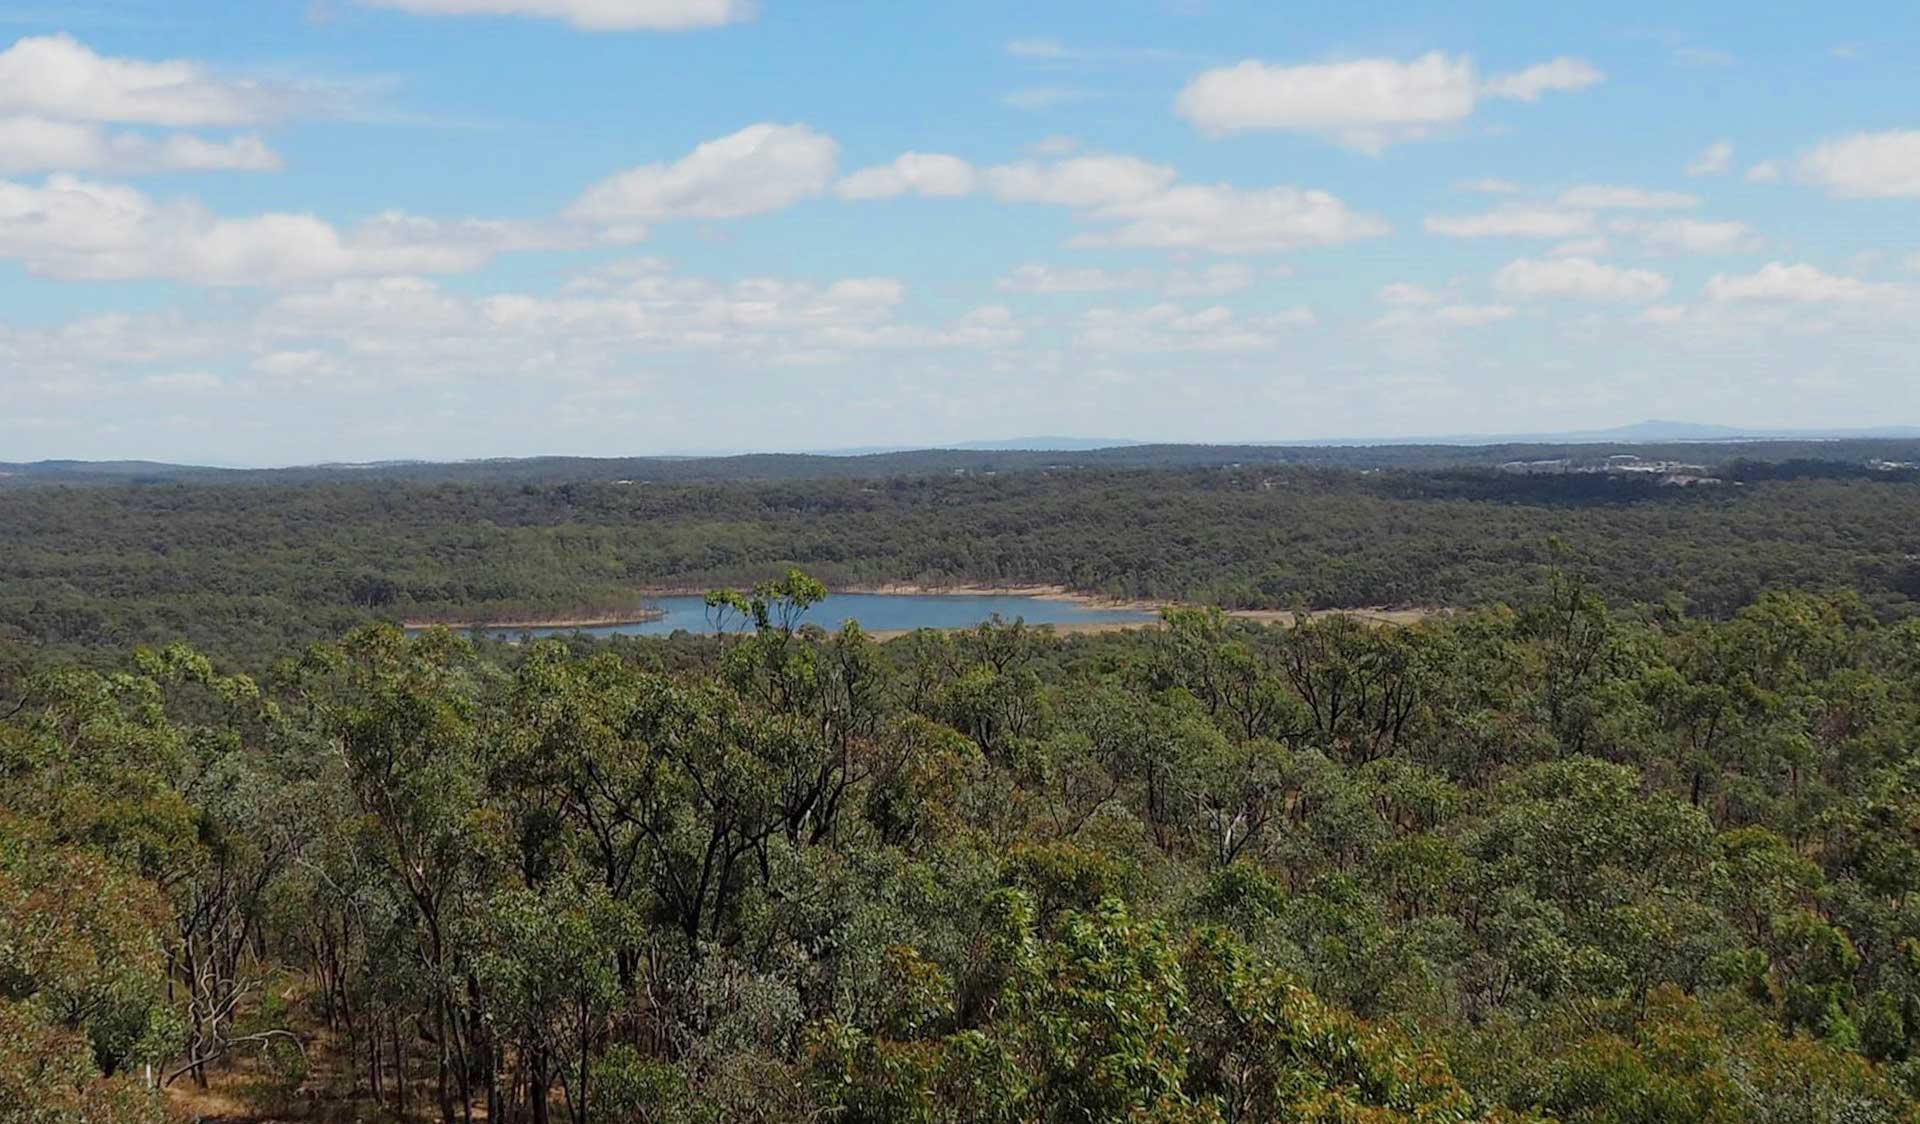 The spectacular view from One Tree Hill at Greater Bendigo National Park